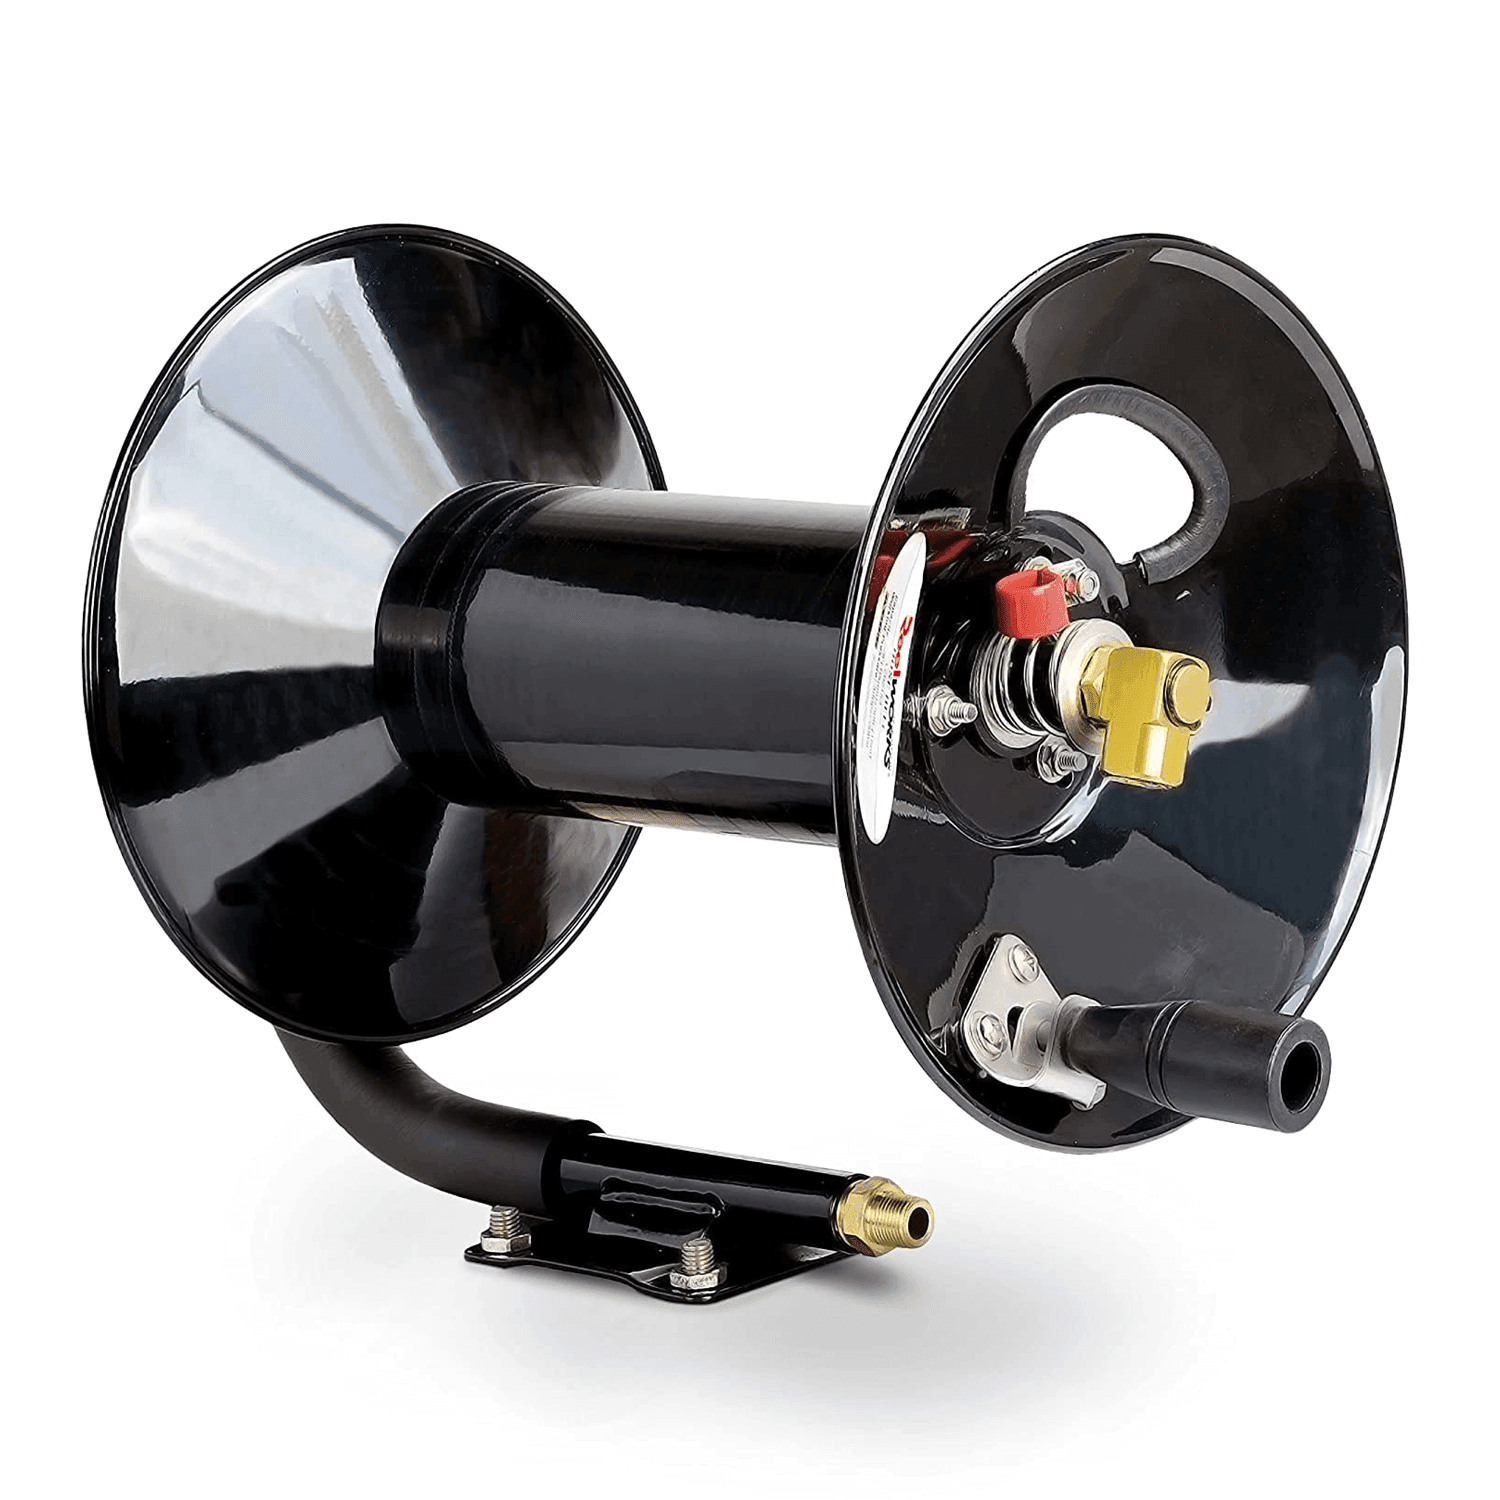 ReelWorks Mountable Manual Hose Reel Crank - Fits up to 100' Ft of